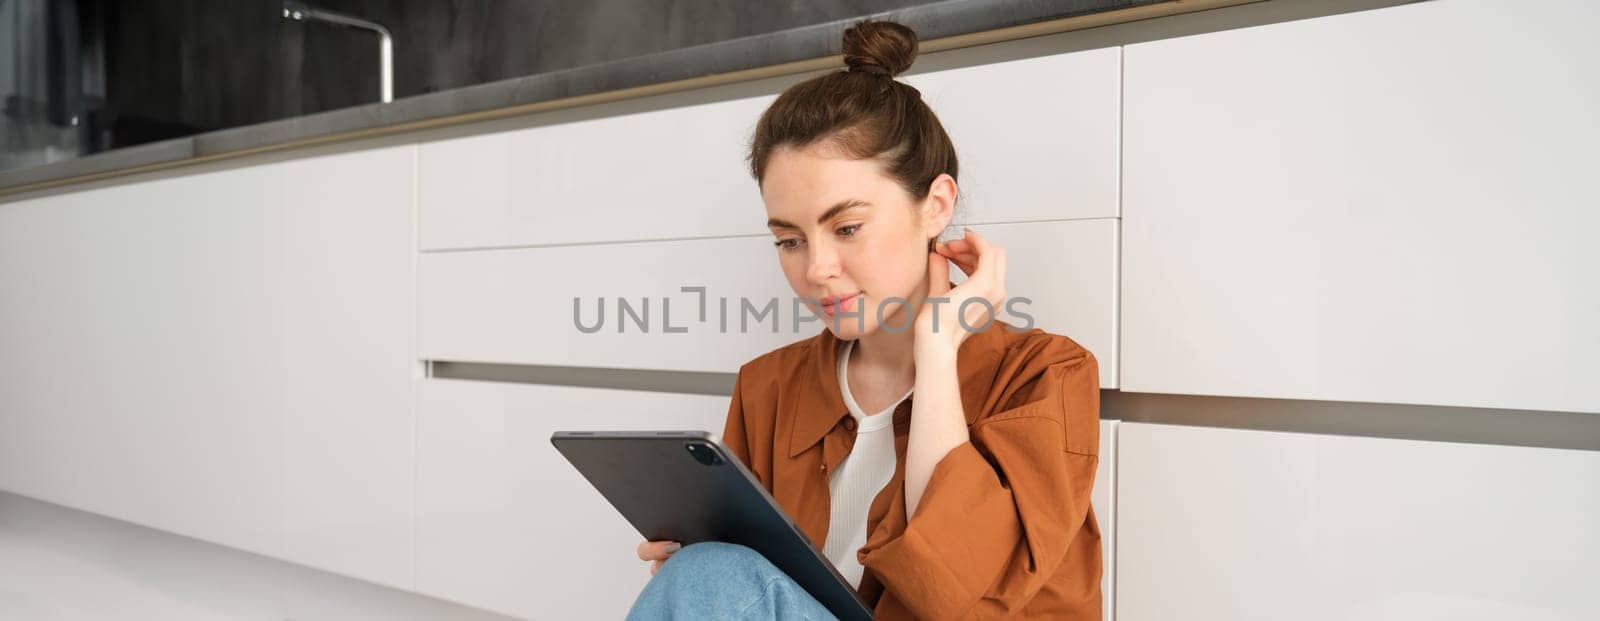 Portrait of pretty young woman at home, sitting on kitchen floor, looking at digital tablet, using gadget, reading on device.